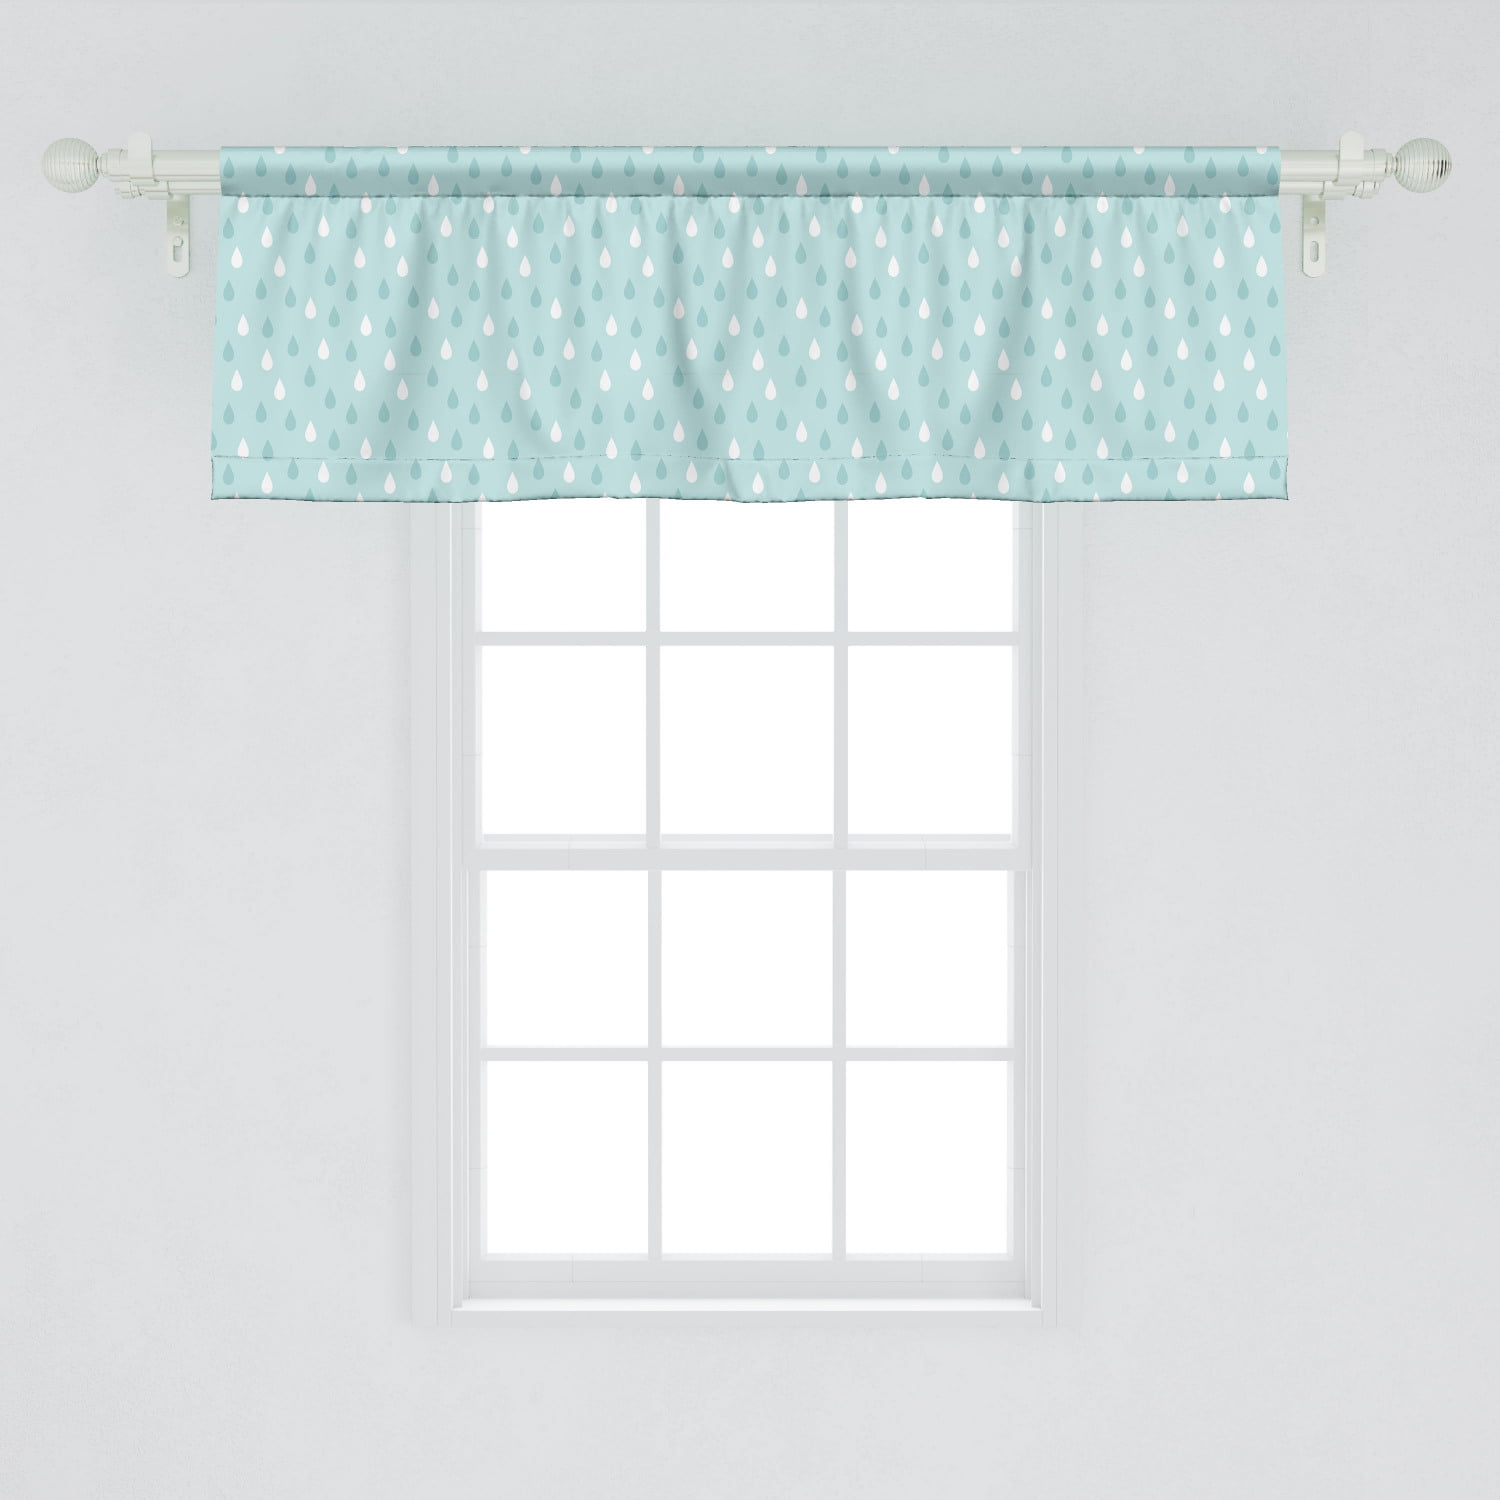 Ambesonne Pale Blue Window Valance, How To Hang Curtains With A Separate Valance